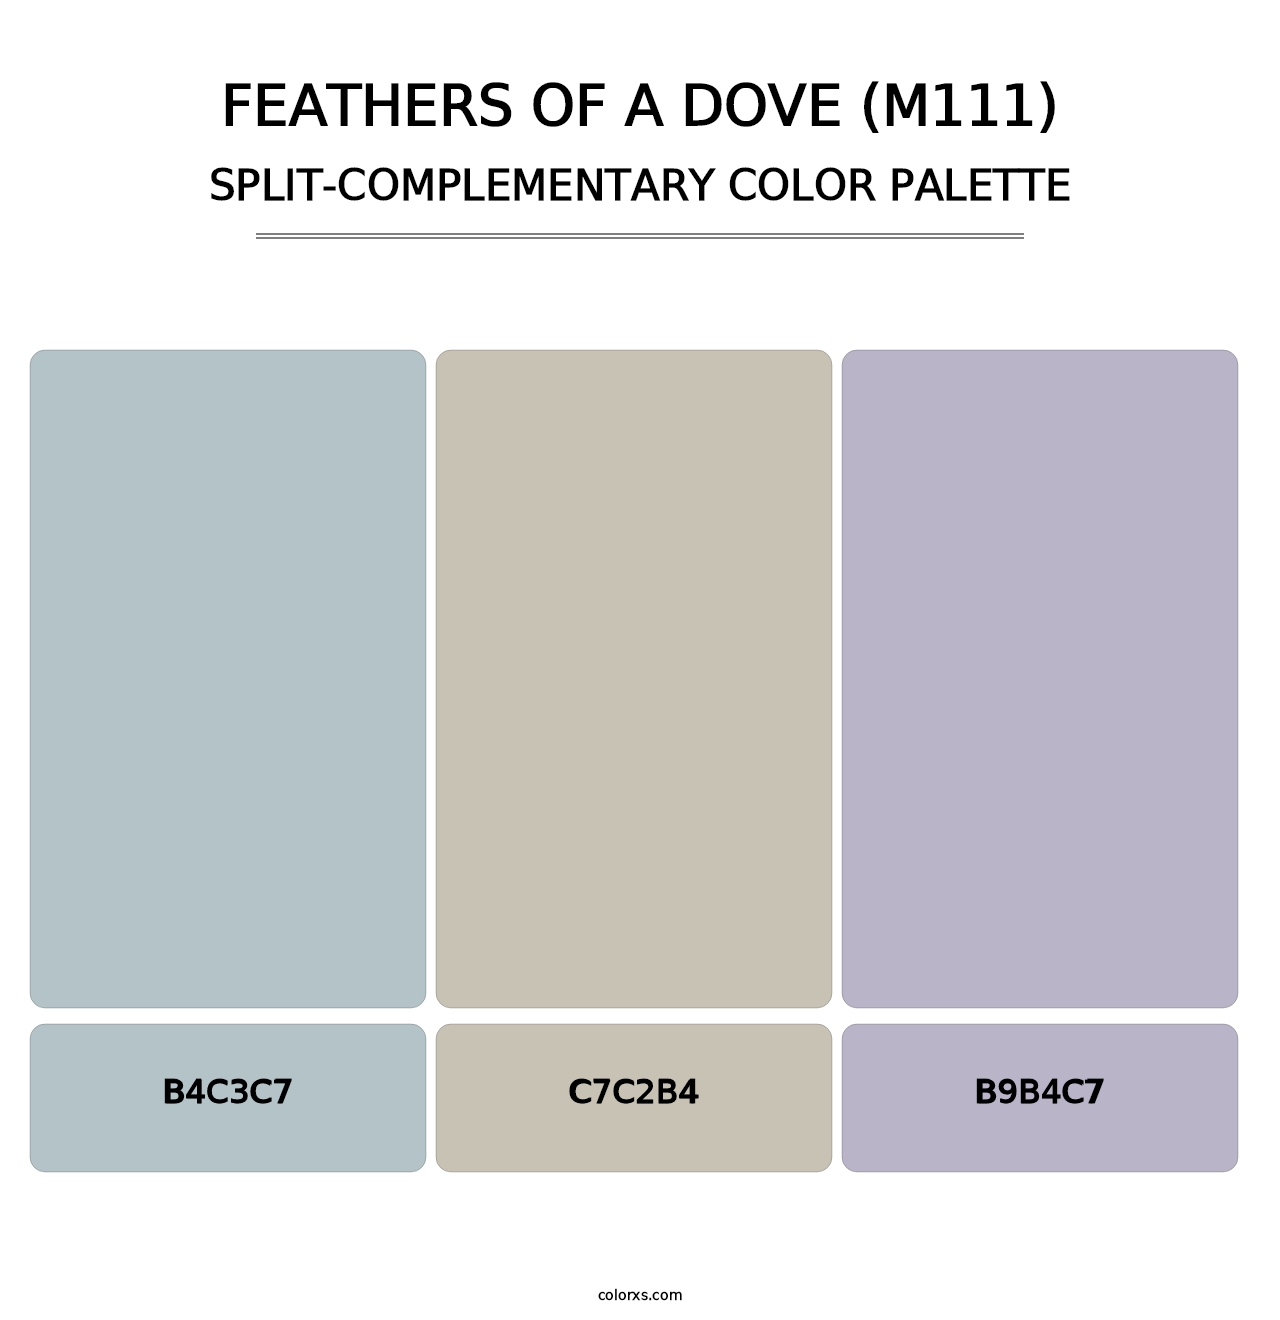 Feathers of a Dove (M111) - Split-Complementary Color Palette